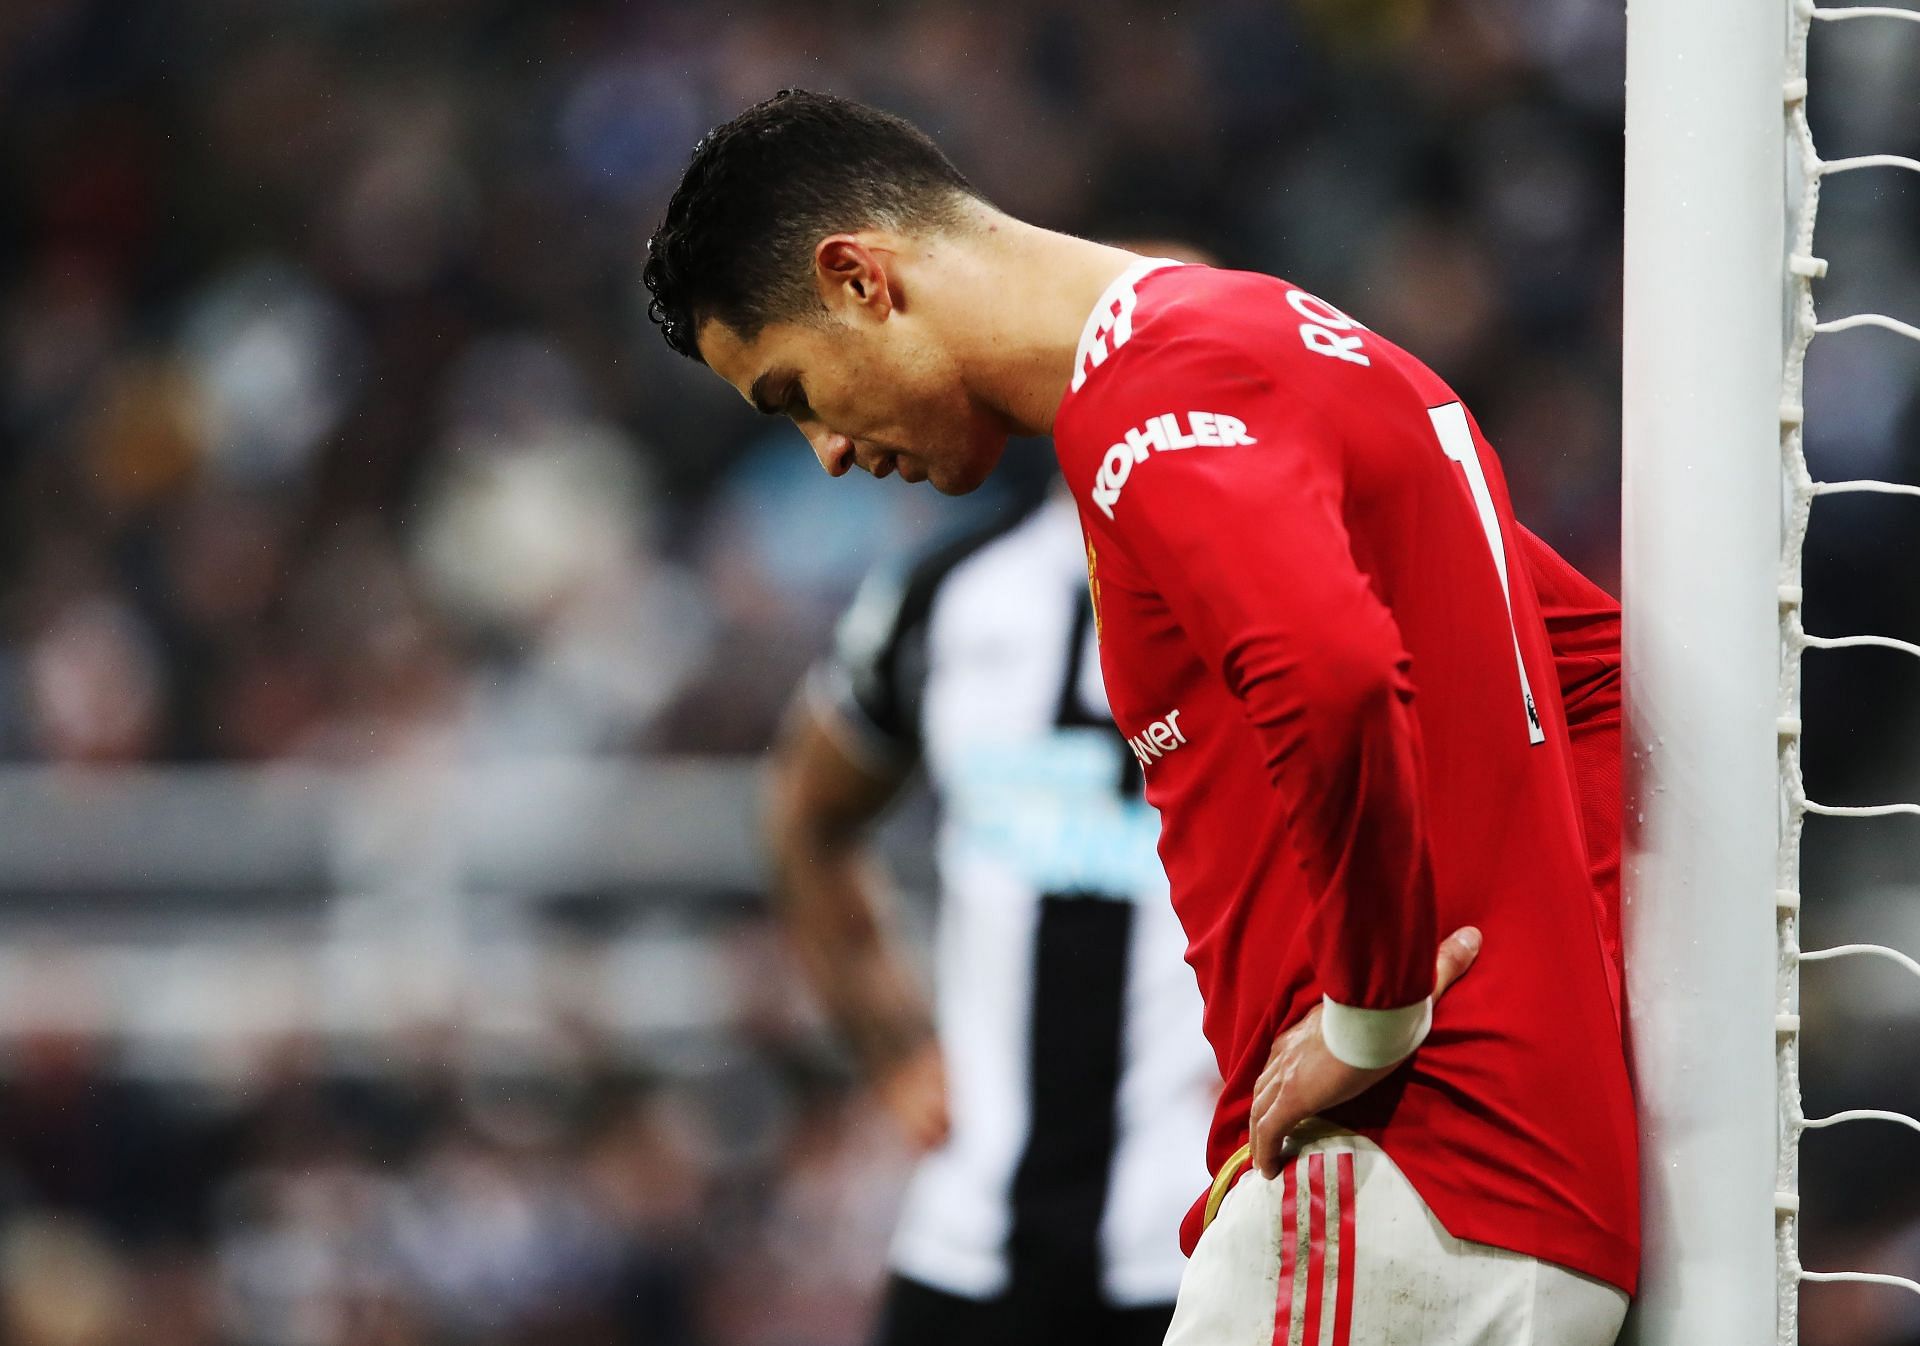 Cristiano Ronaldo has received criticism for his attitude towards Manchester United&rsquo;s younger players.